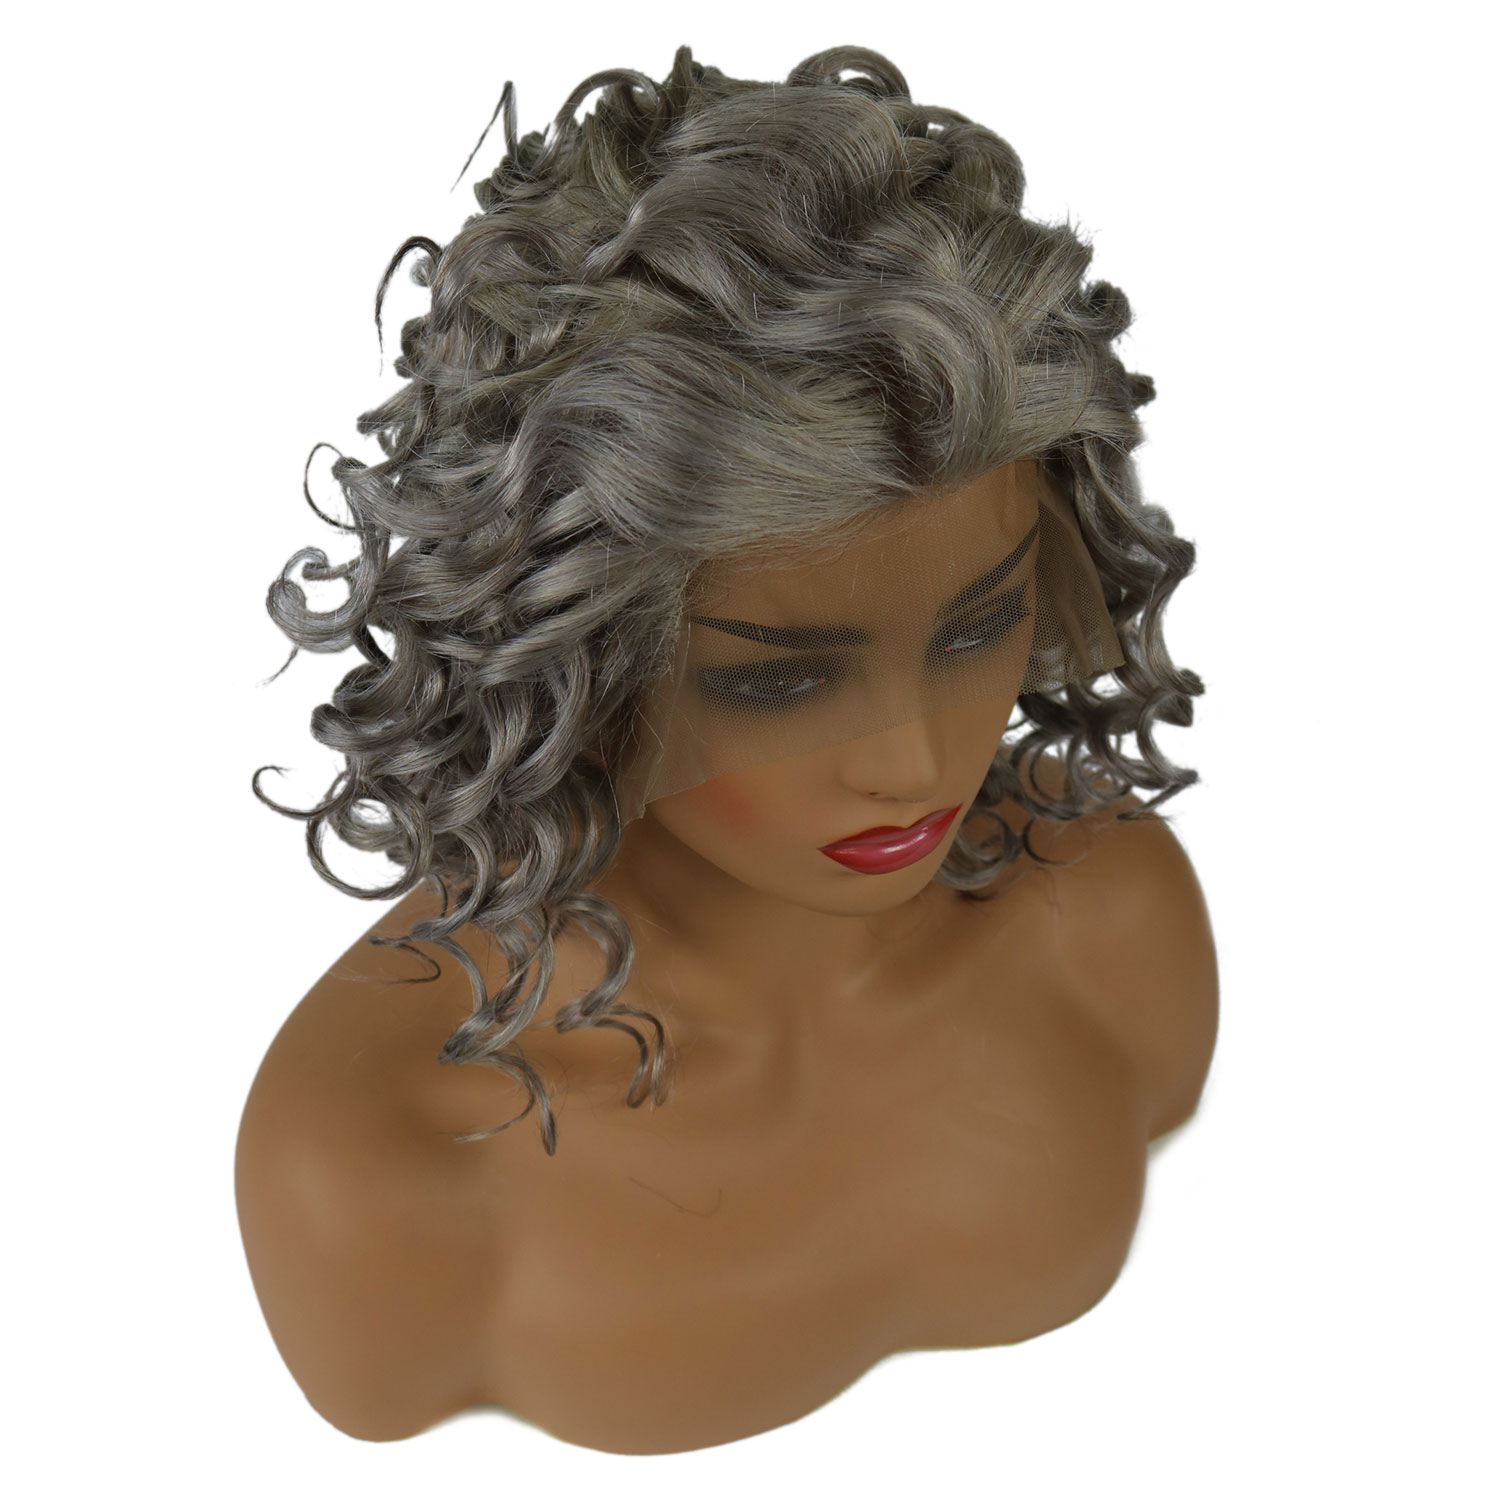 Salt and Pepper Hair Medium Length Human Hair Lace Front Curly Wigs 18 Inches